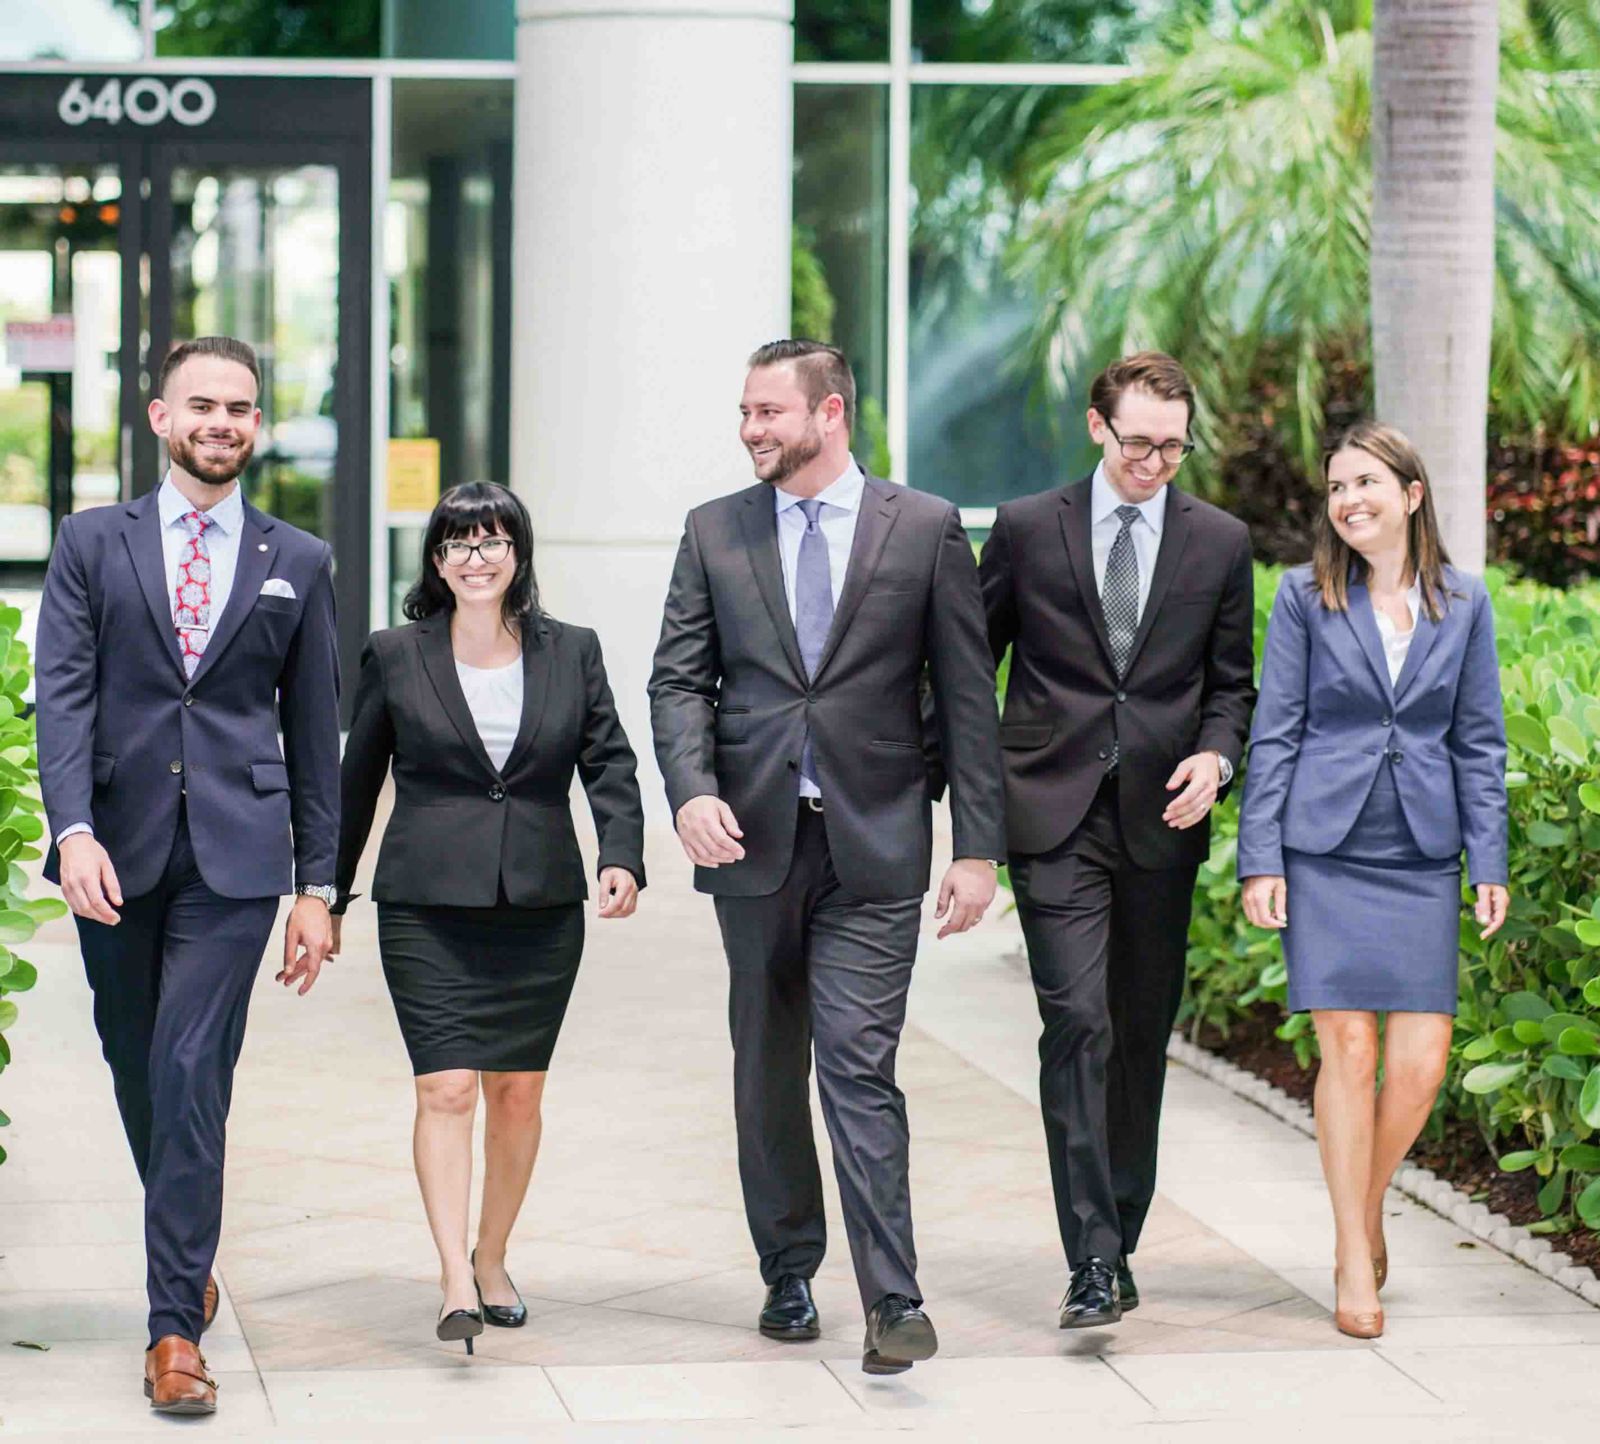 Our Rossen Law Firm Core Values: How we Practice Criminal Defense in South Florida